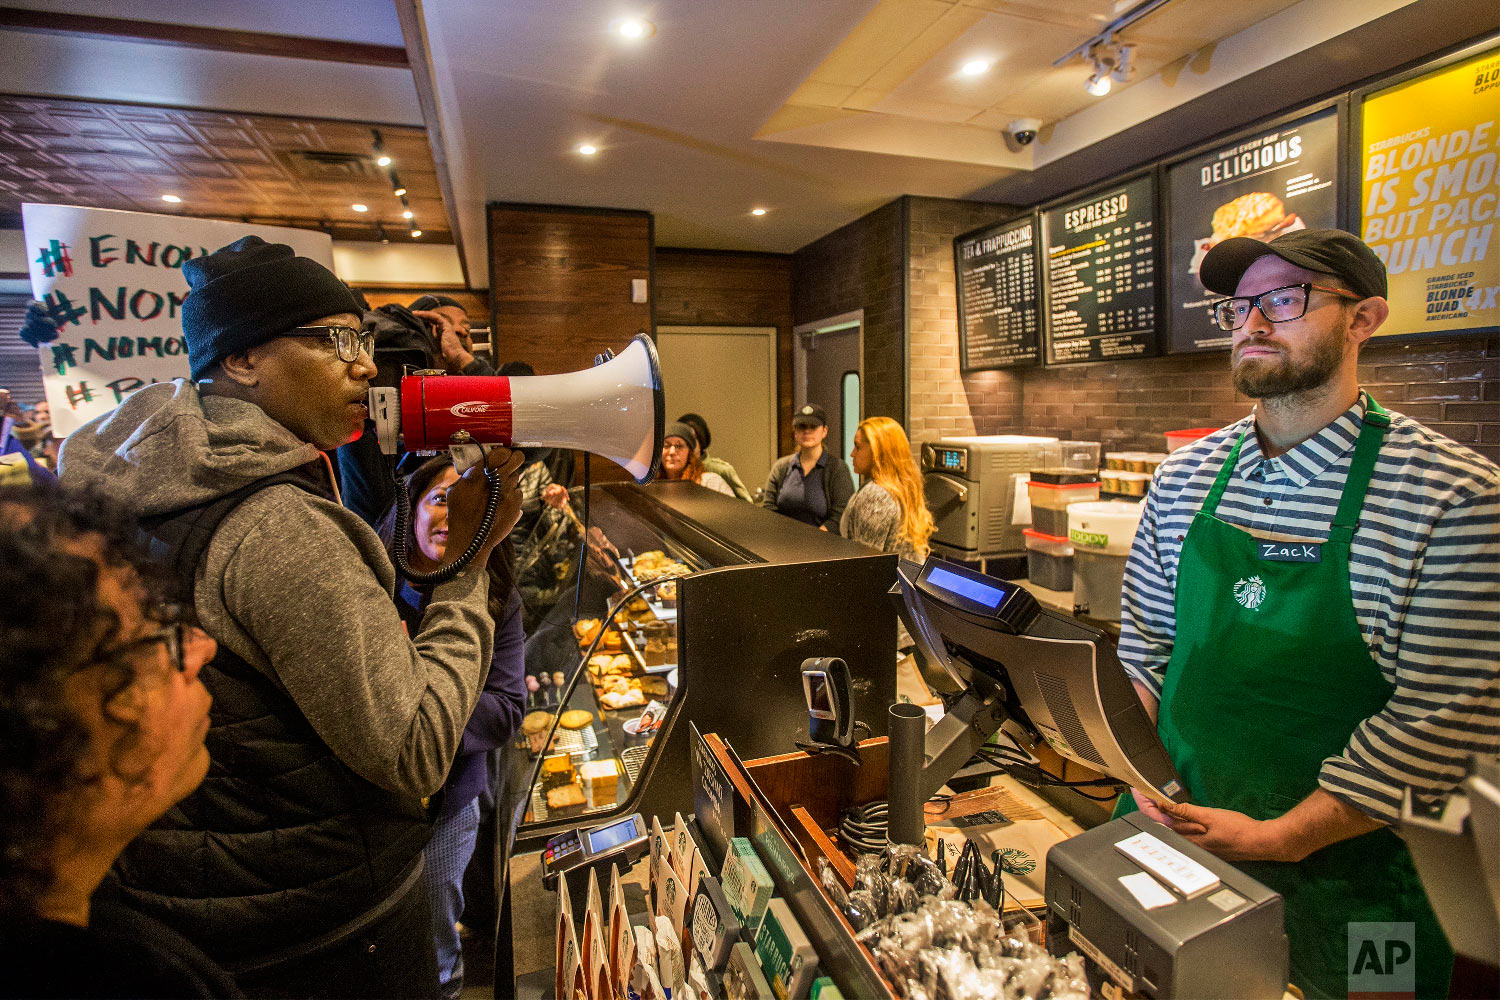  Local Black Lives Matter activist Asa Khalif, left, uses a megaphone inside a Starbucks on April 15, 2018, demanding the firing of the manager who called police on two black men who had entered the store, but didn’t make a purchase, resulting in the